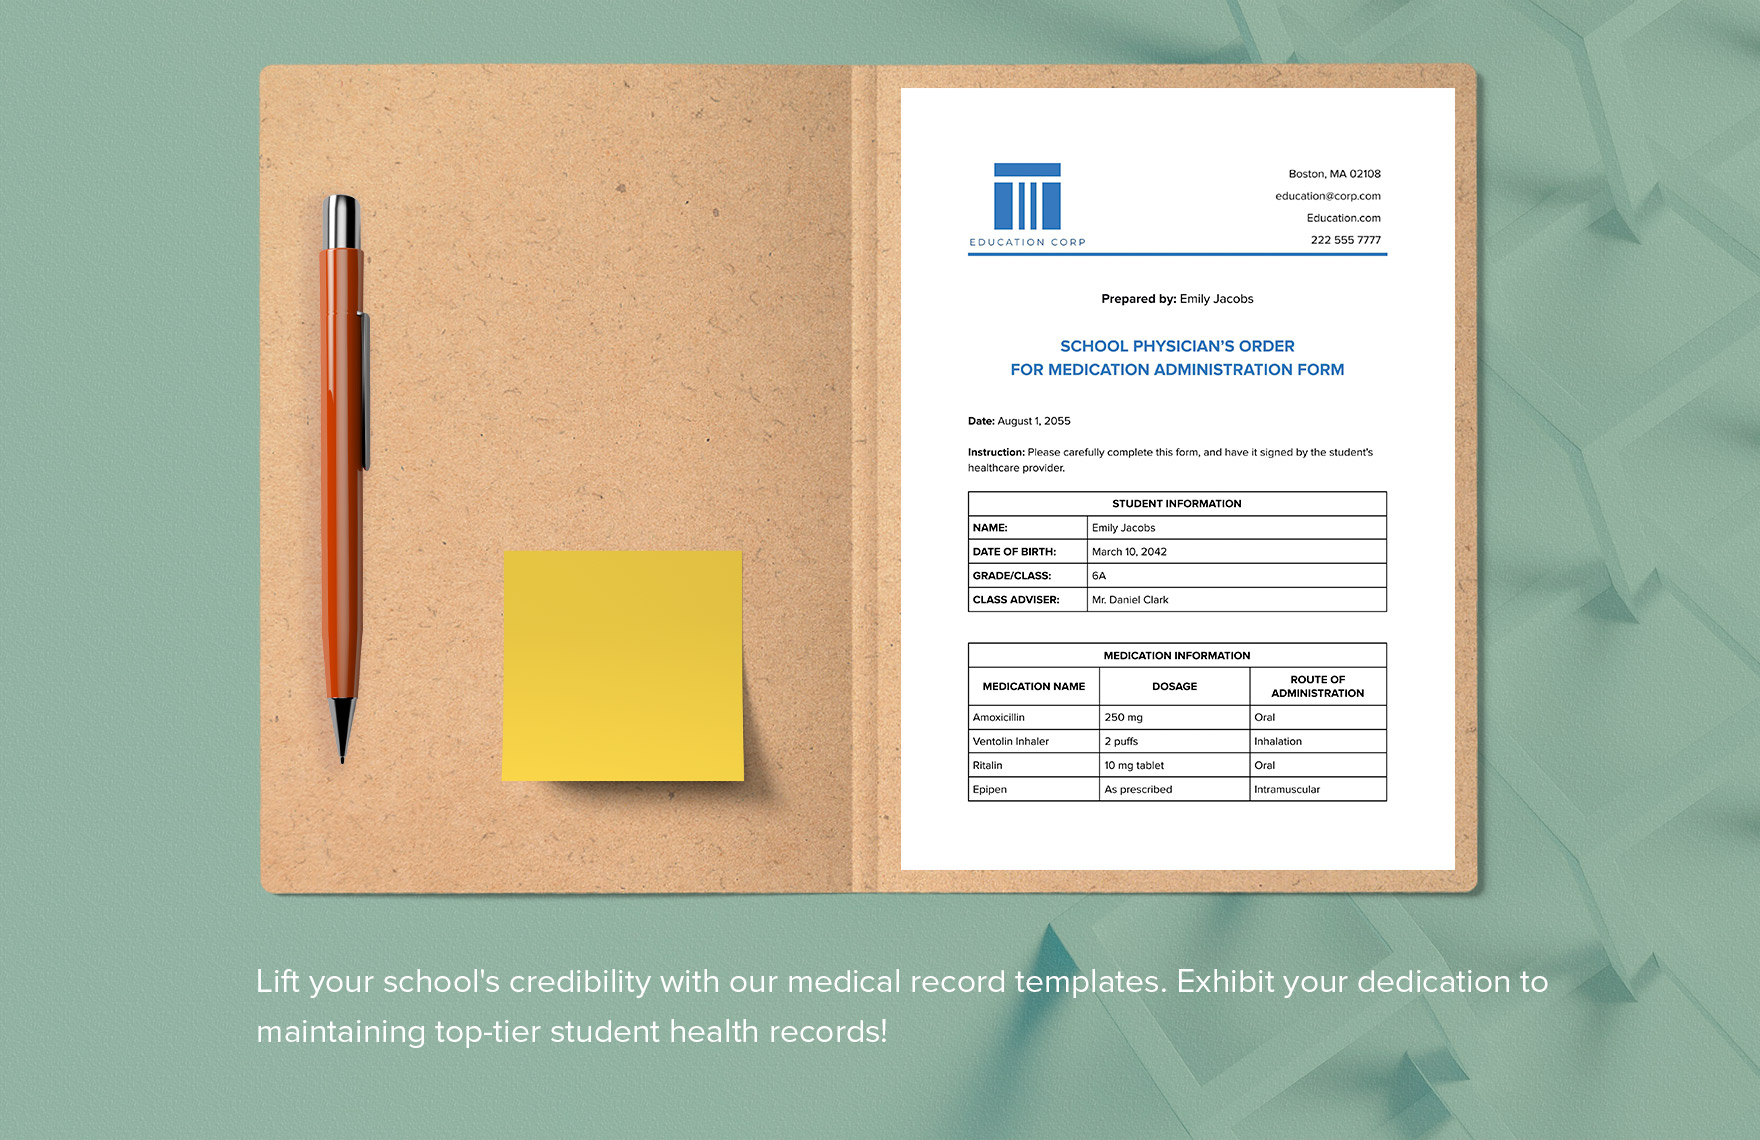 School Physician's Order for Medication Administration Form Template